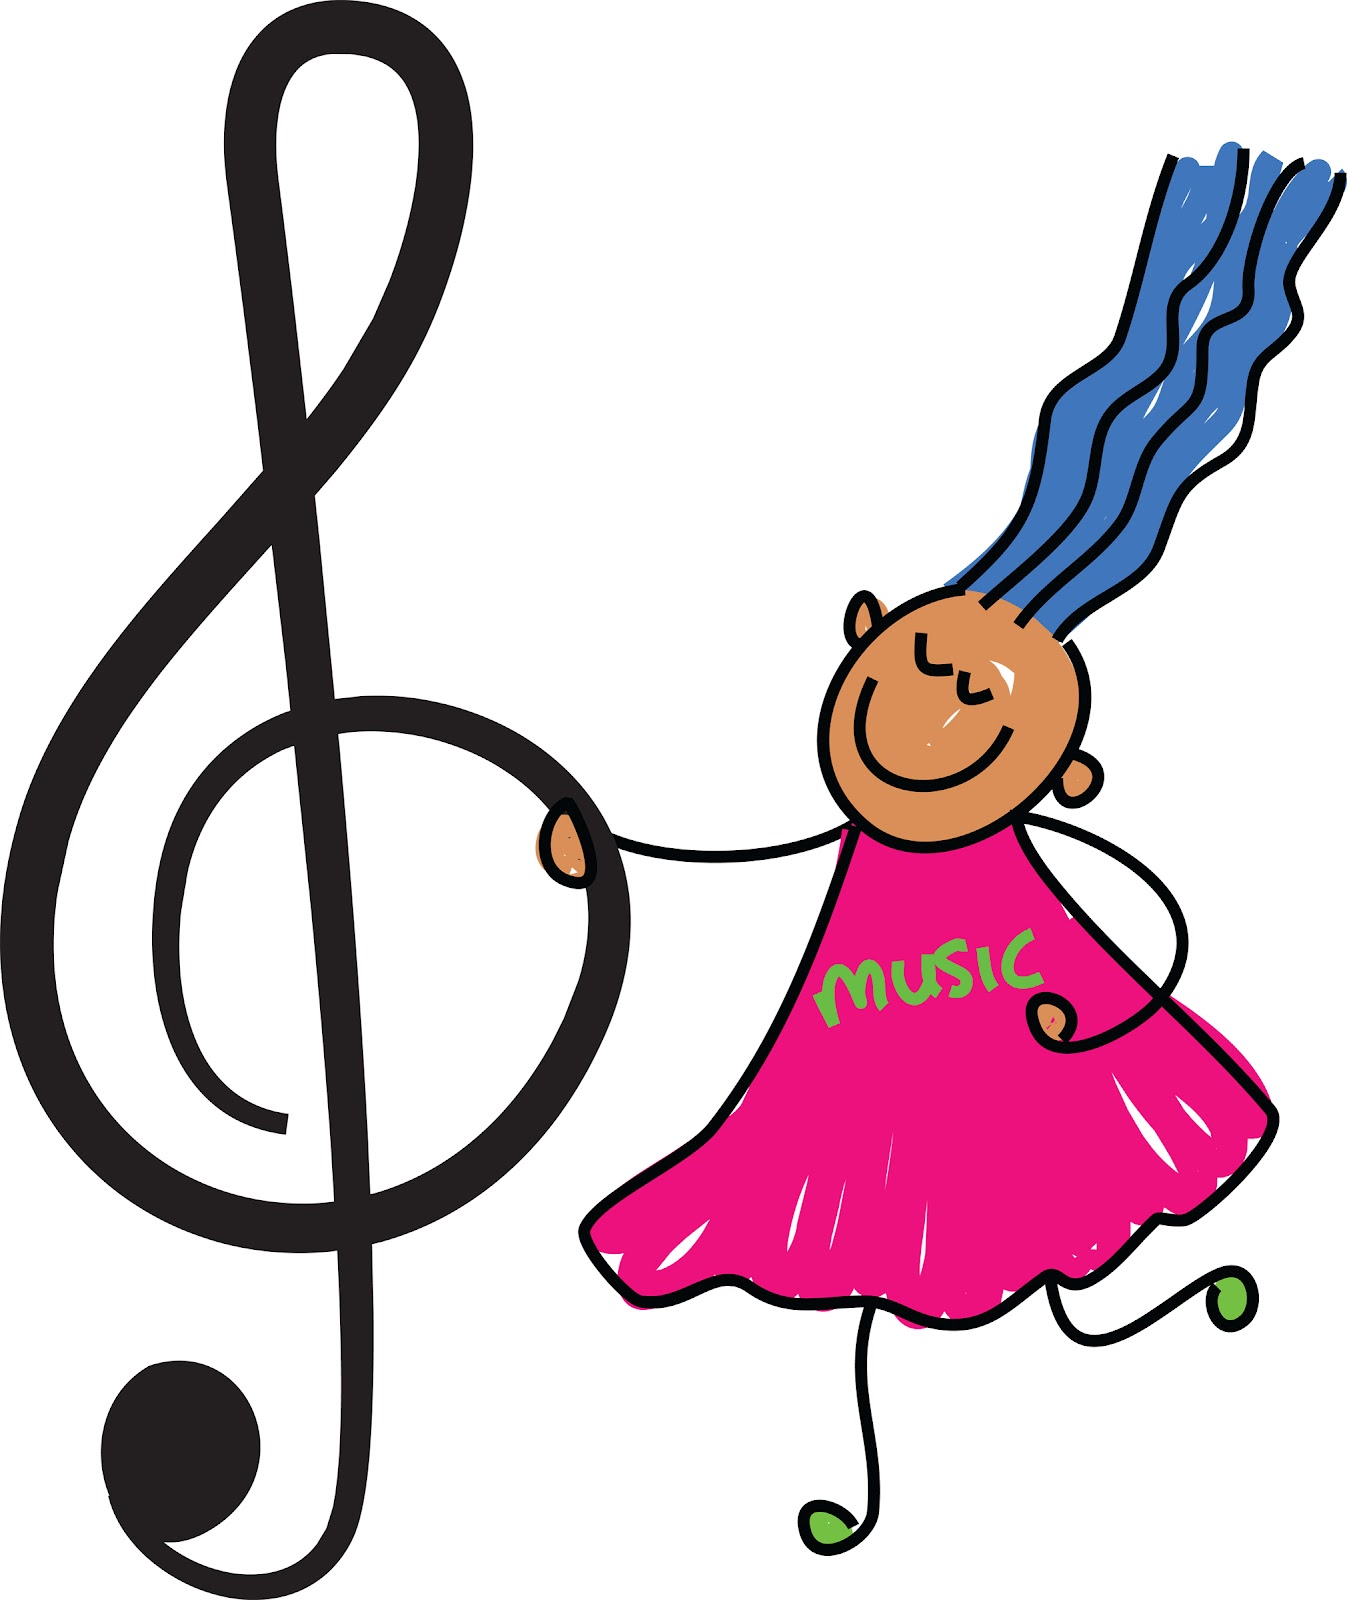 Music note border clipart free clipart images - Cliparting.com